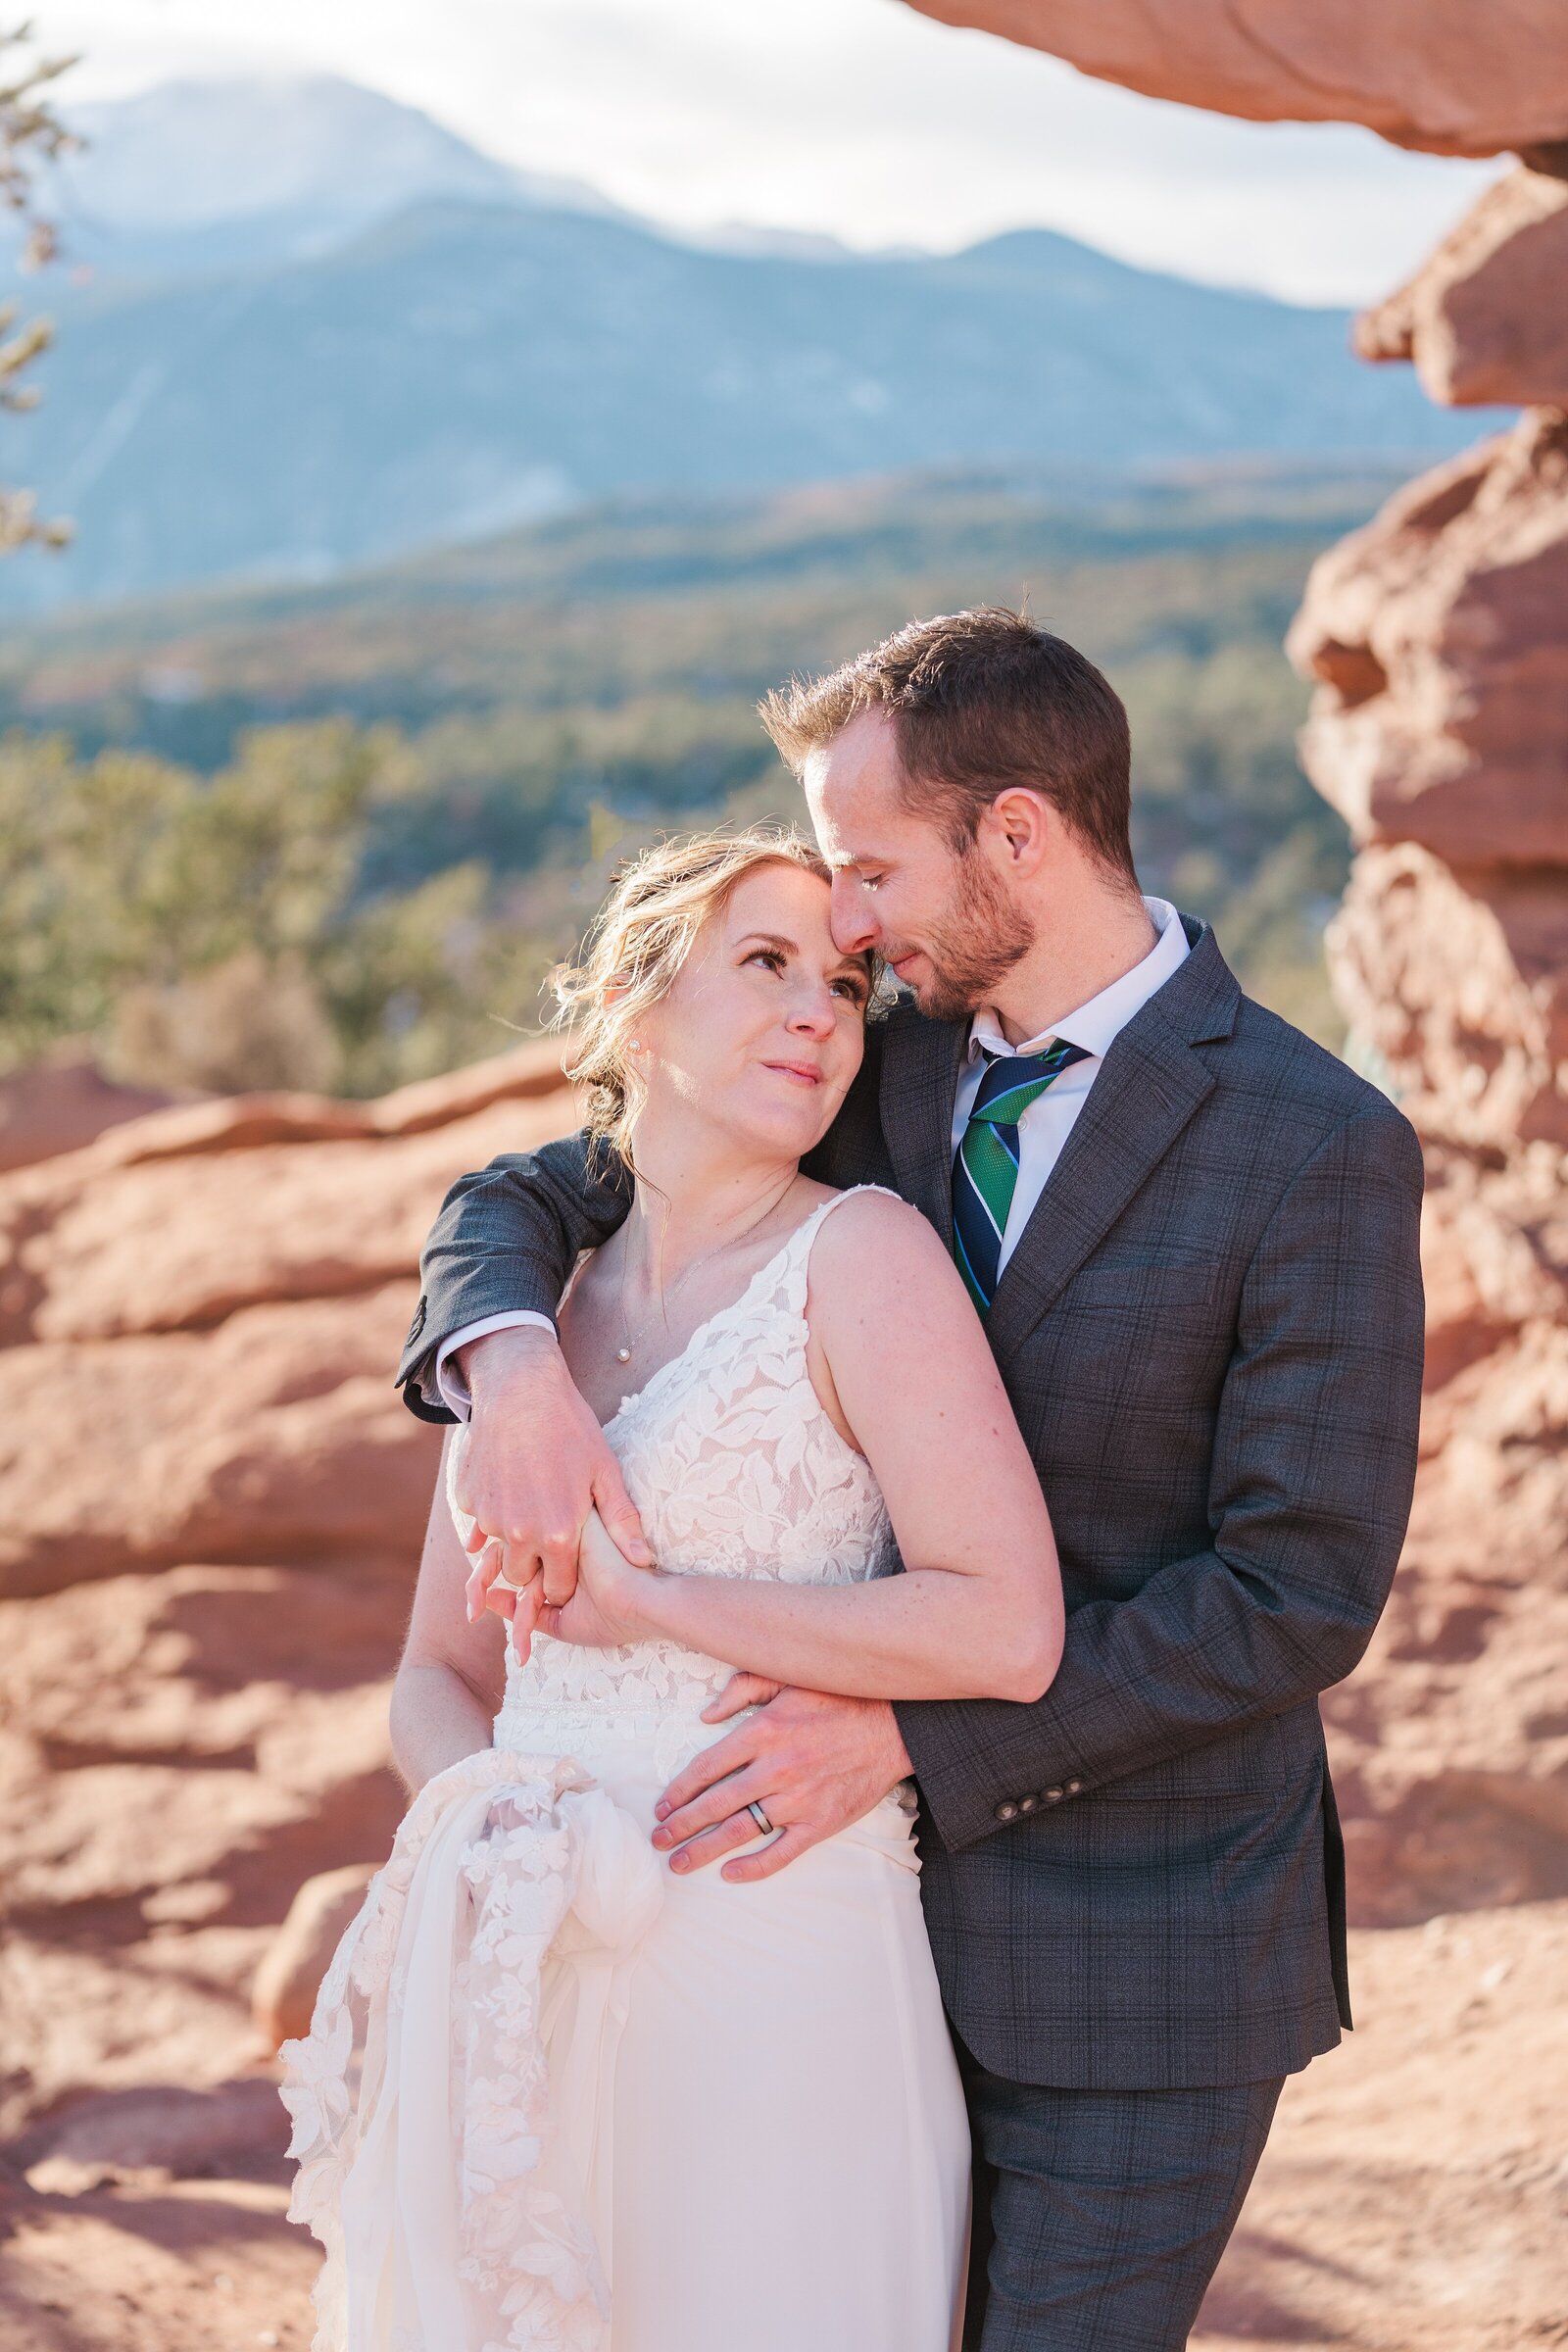 Choose Sam Immer Photography to capture the beauty and emotion of your elopement ceremony. With our expert eye for natural light and candid storytelling, we'll ensure your memories last a lifetime.